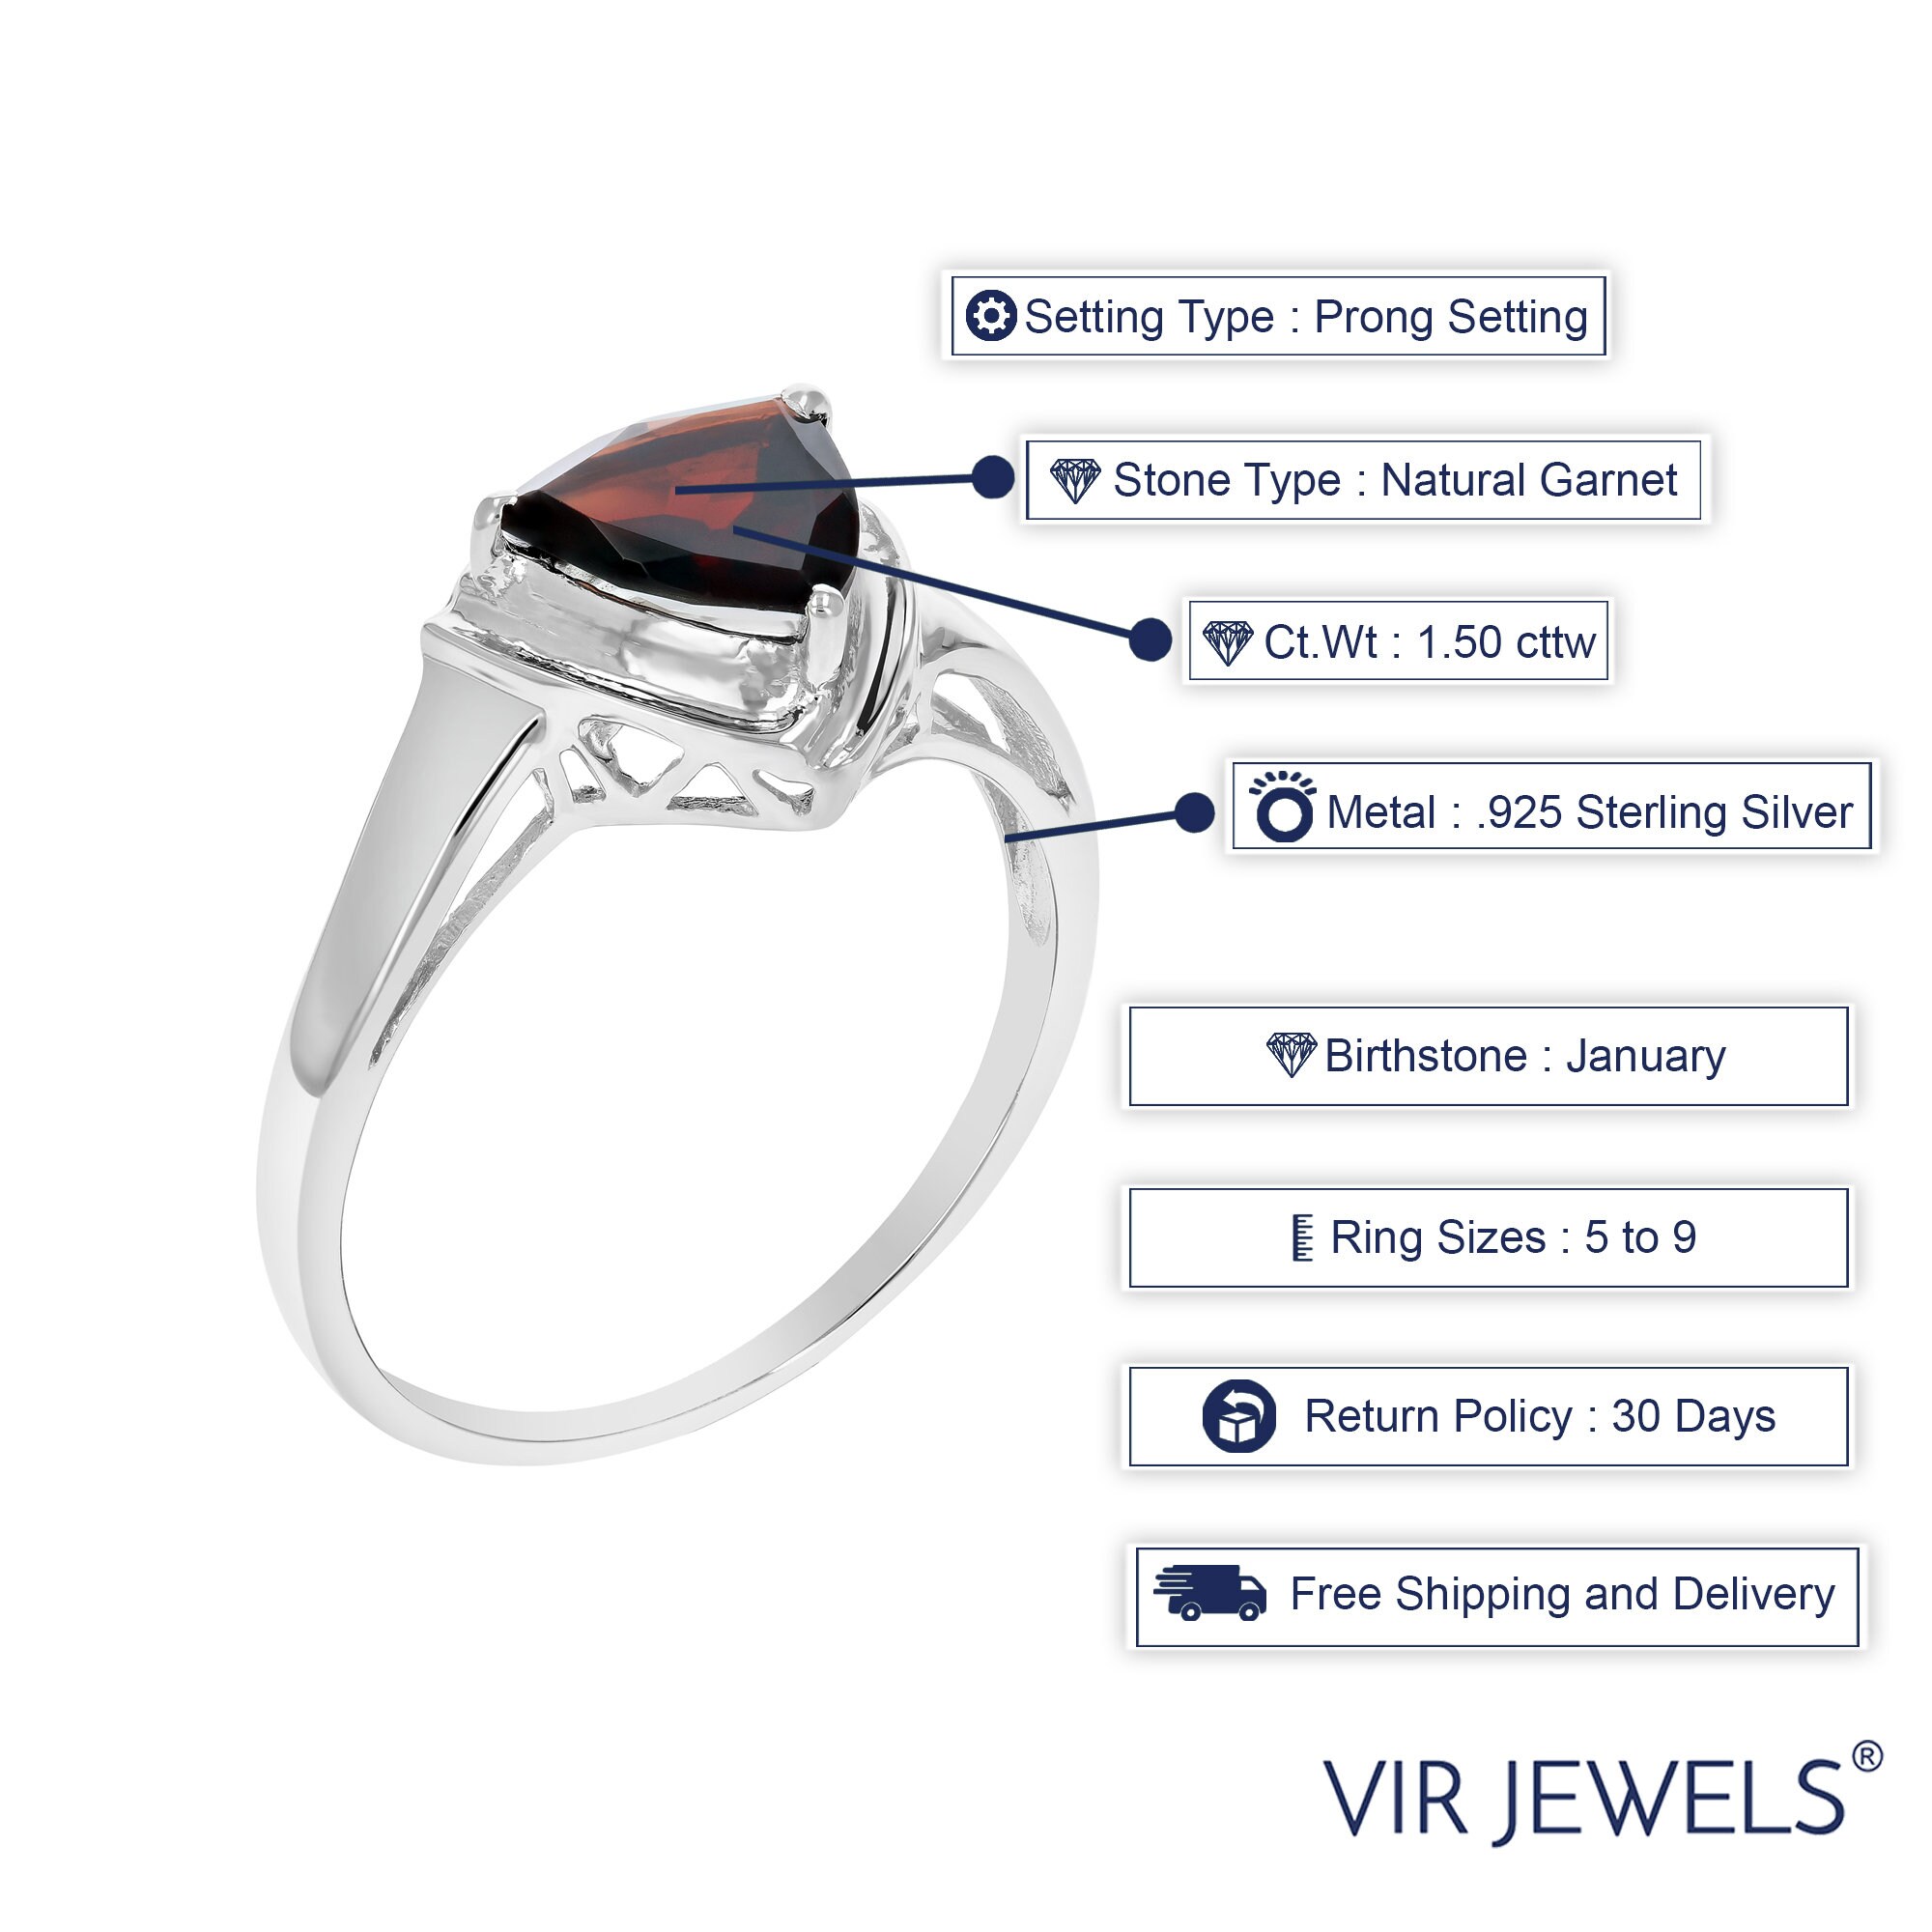 1.50 Cttw Garnet Ring .925 Sterling Silver With Rhodium Plating